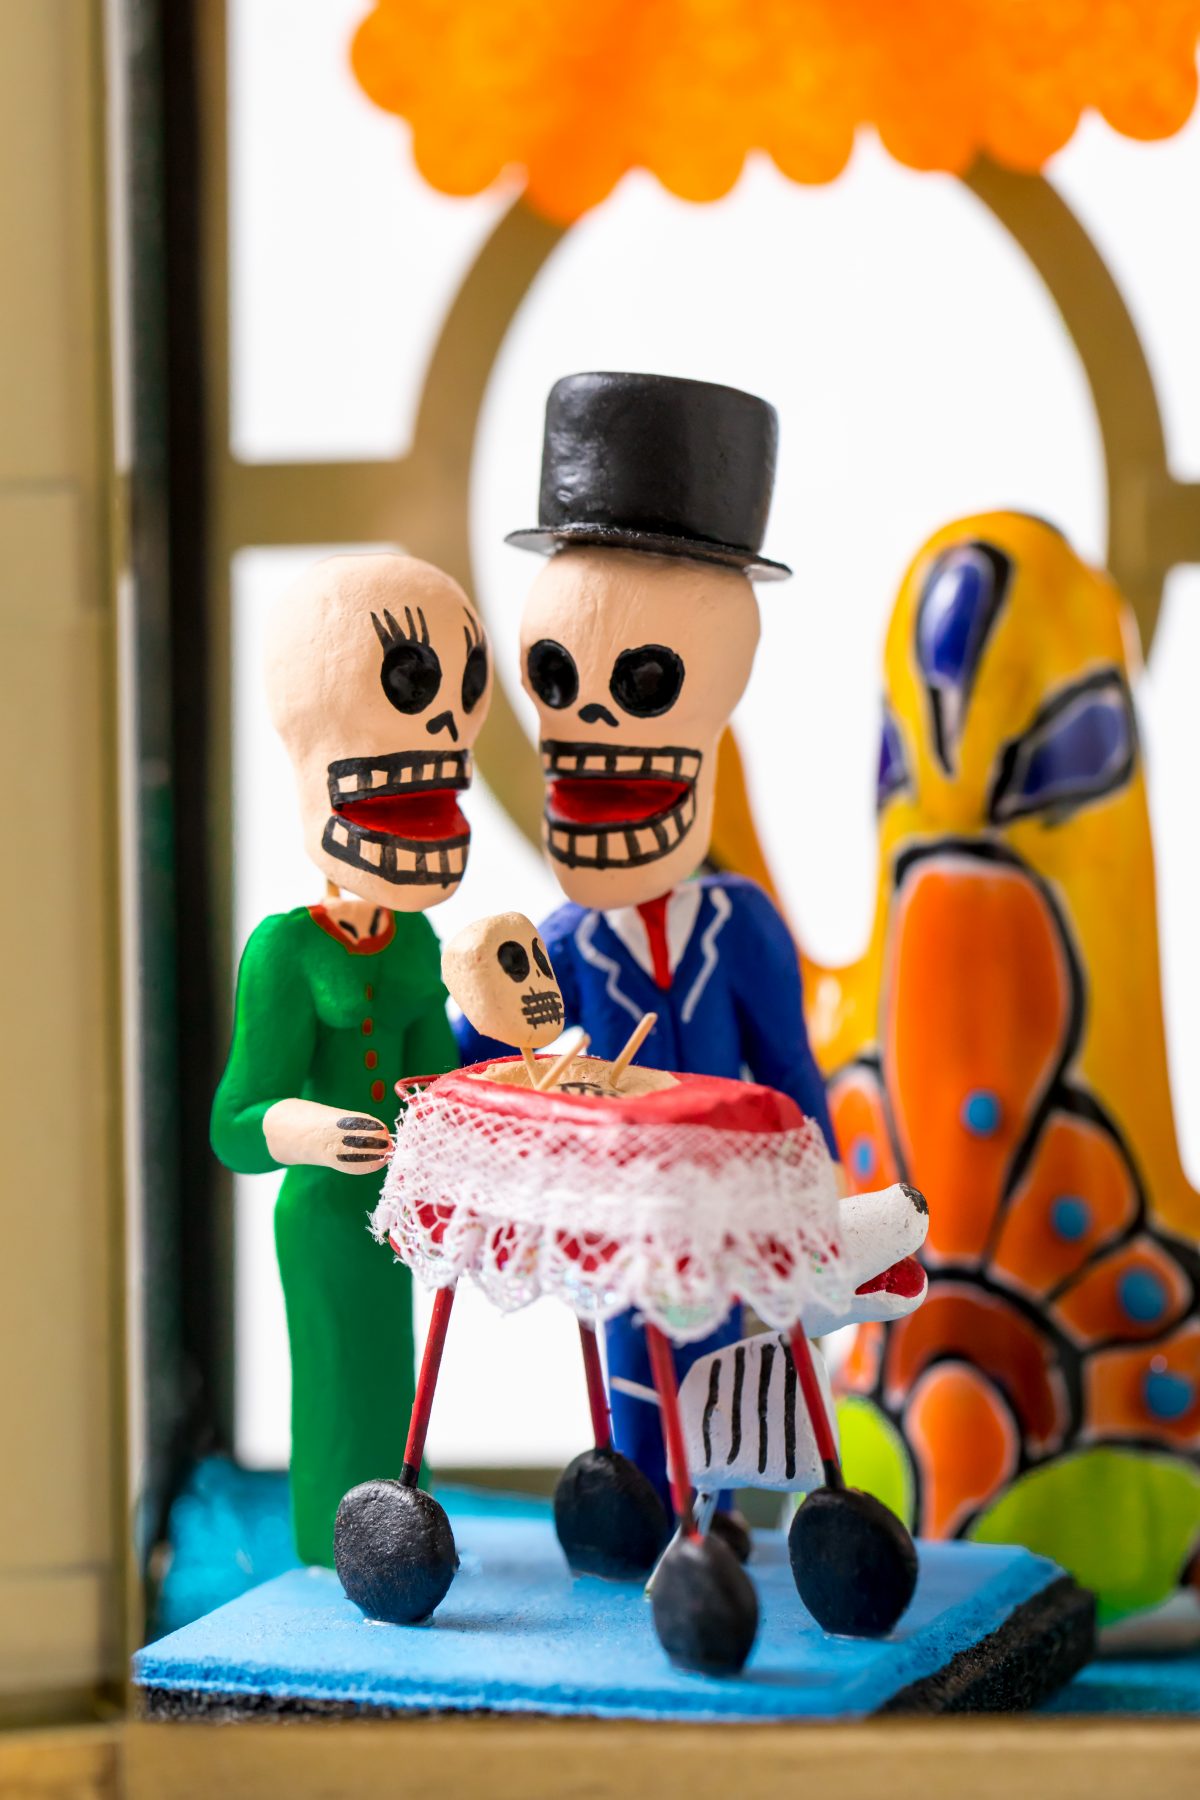 5D4B6400 - Crafty Chica - Day of the dead Shrine